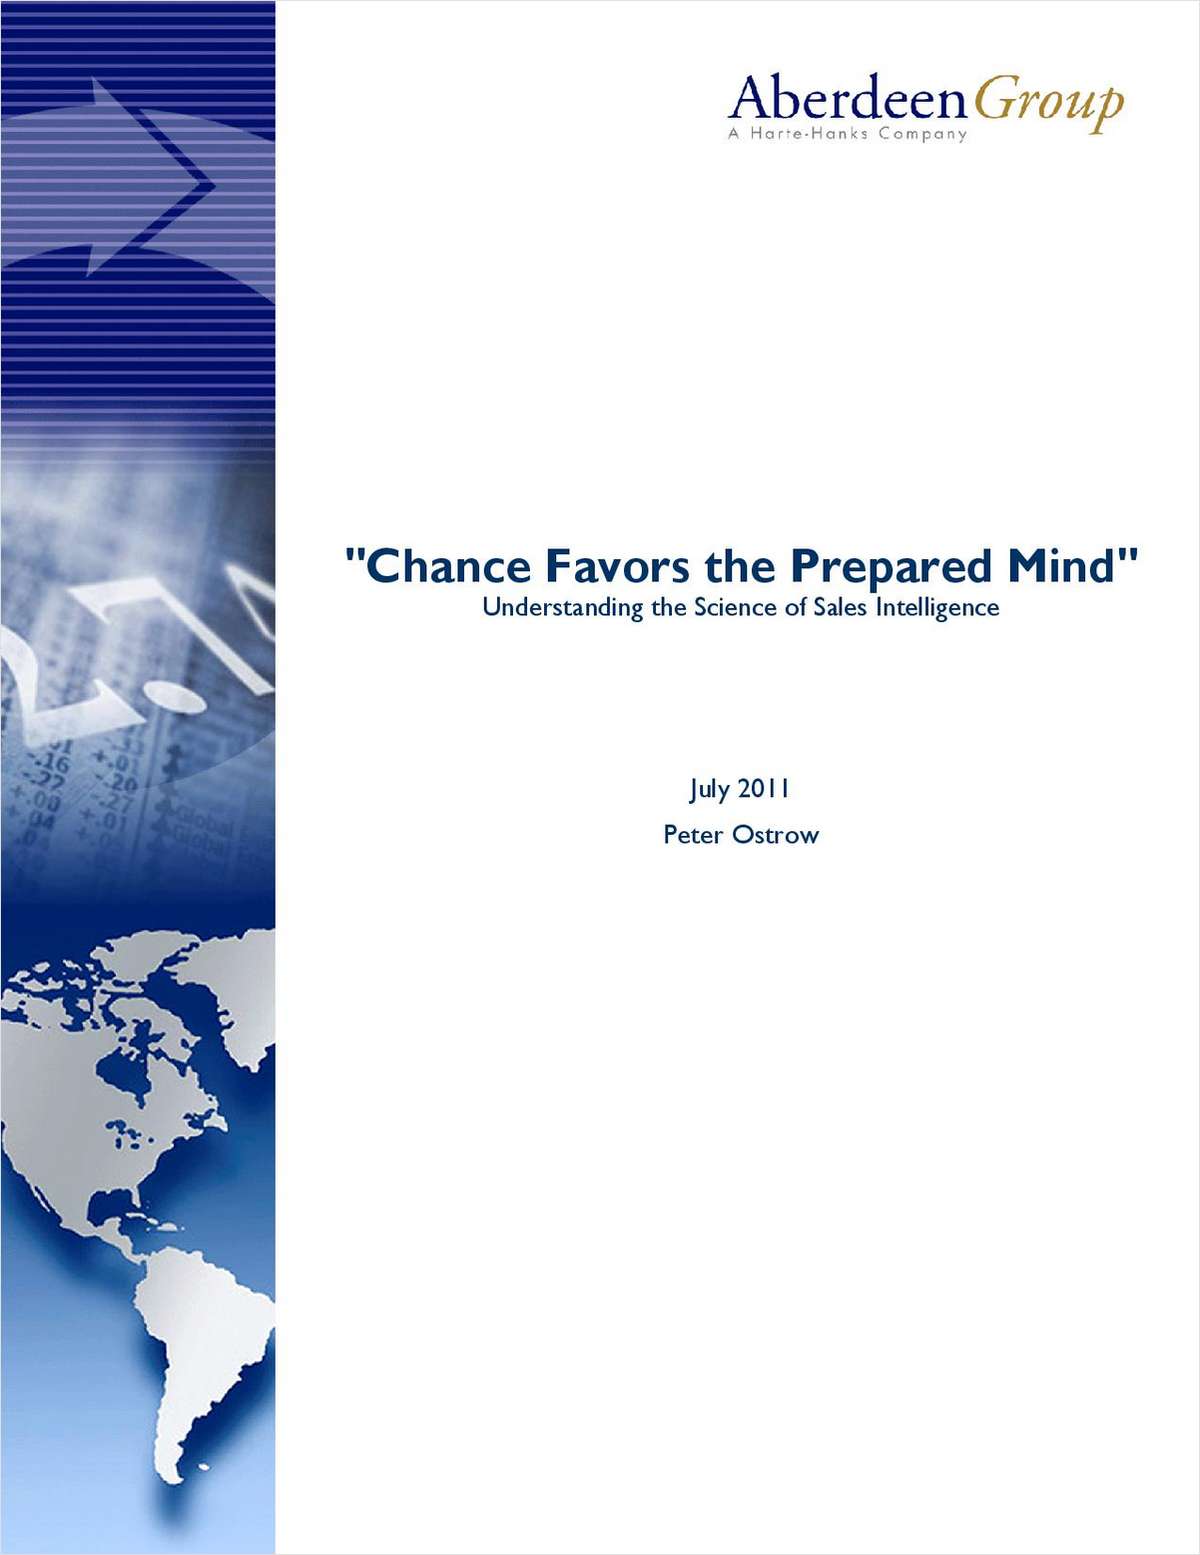 Chance Favors the Prepared Mind: Understanding the Science of Sales Intelligence